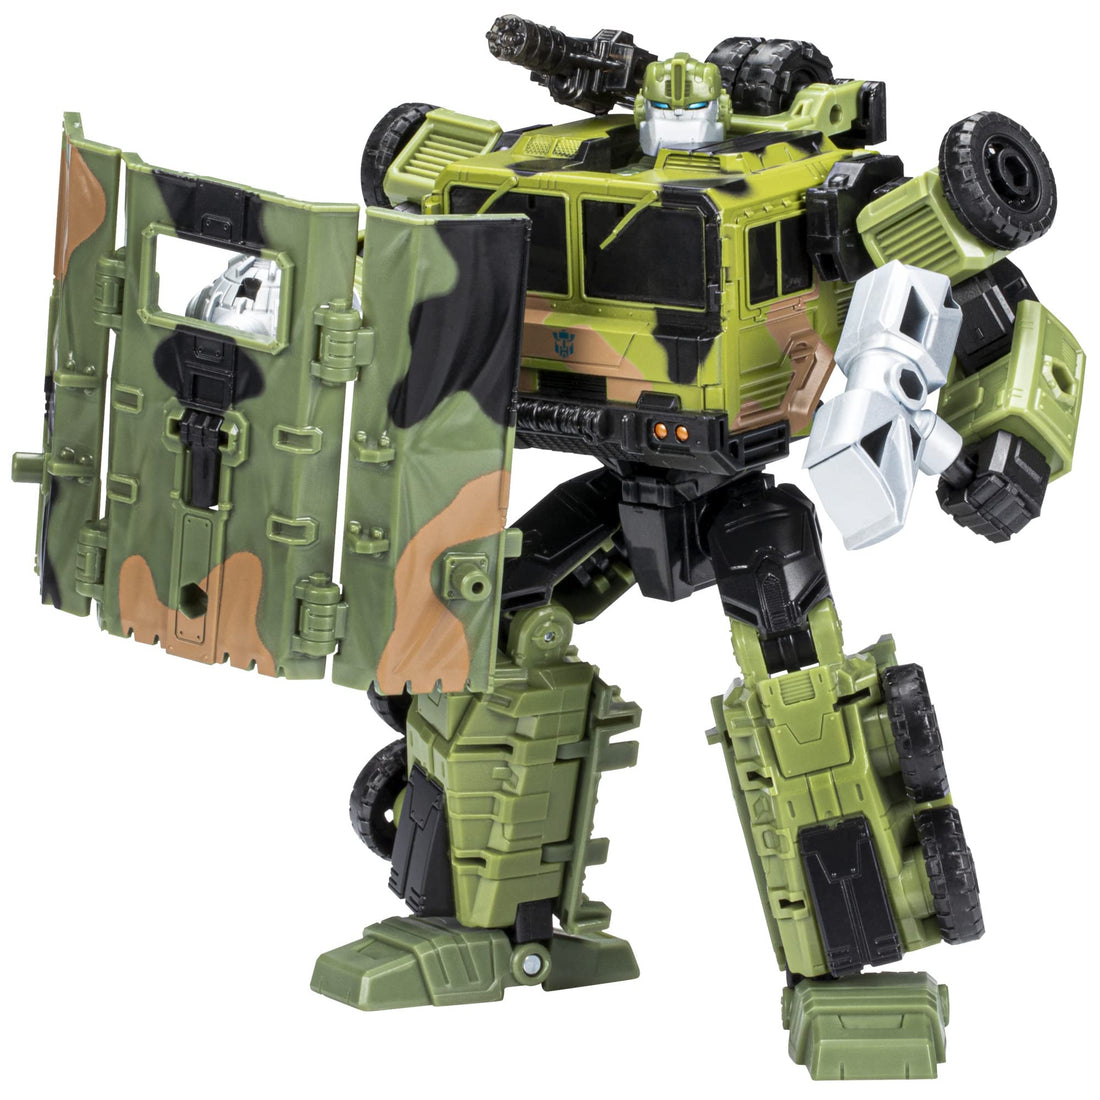 TRANSFORMERS Generations Legacy Wreck ‘N Rule Collection Prime Universe Bulkhead, Ages 8 and Up, 17.5 cm, Multicolor (F3945)